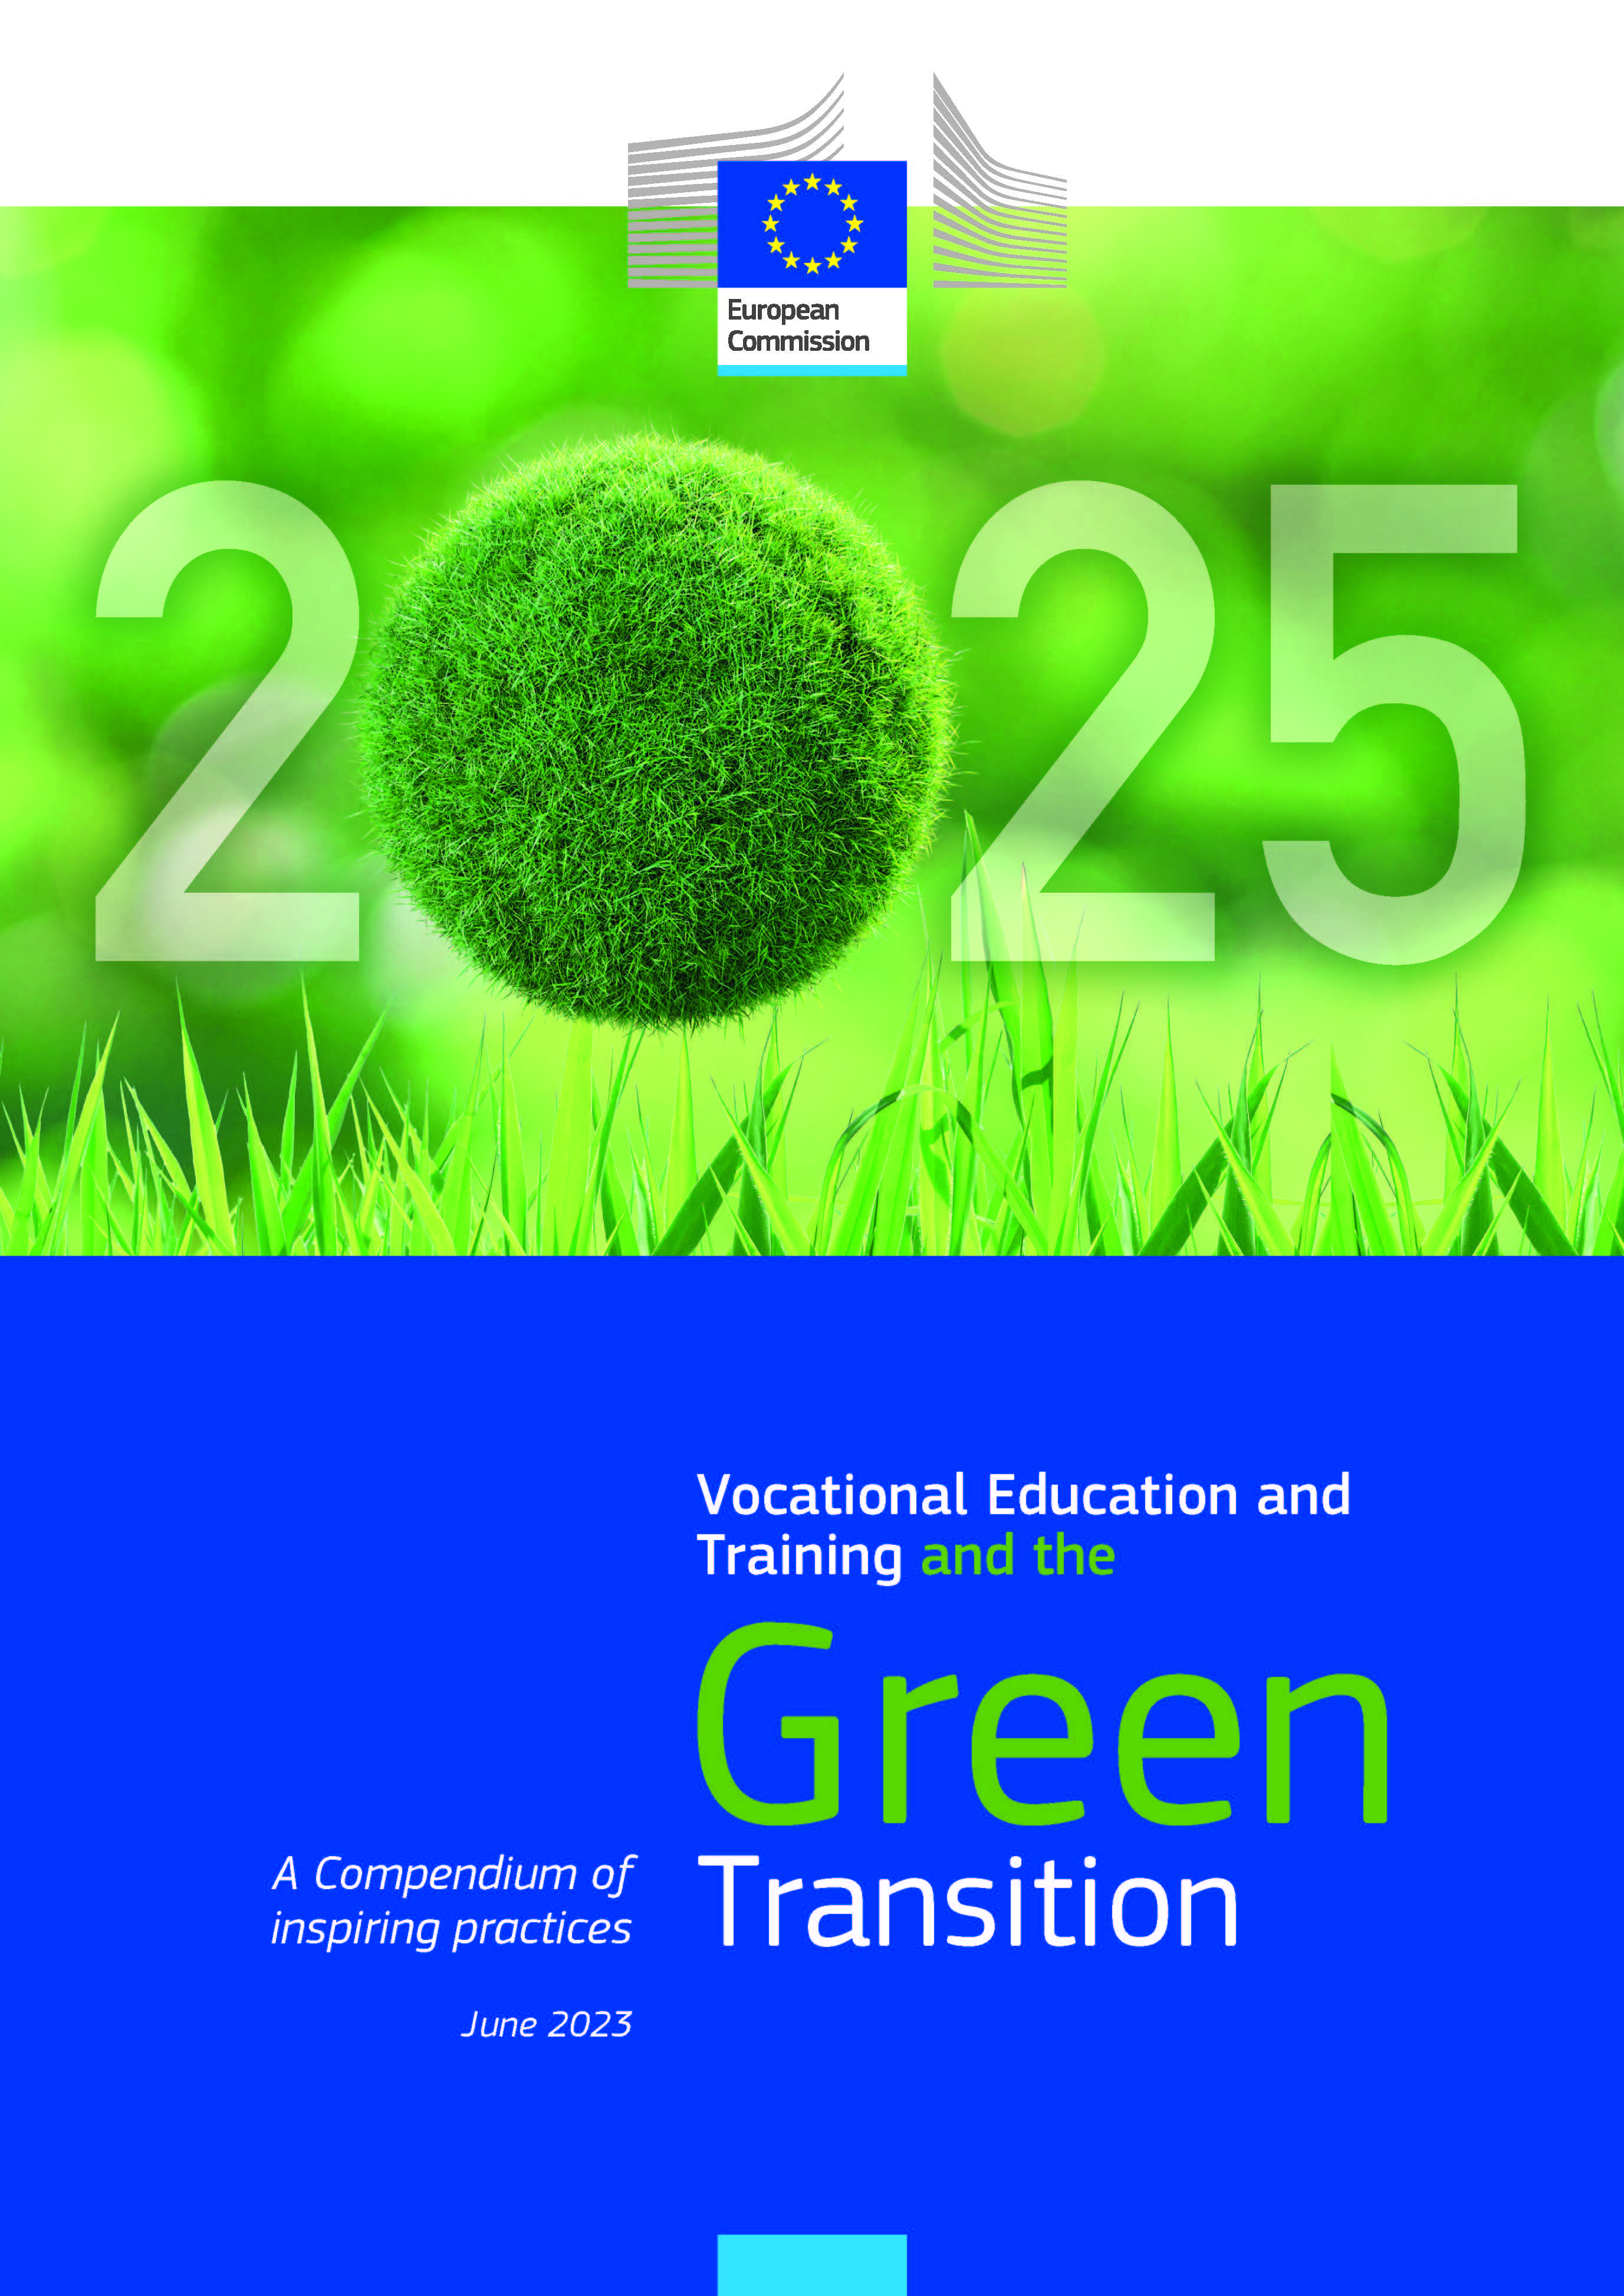 Vocational Education and Training and the Green Transition - A Compendium of inspiring practices